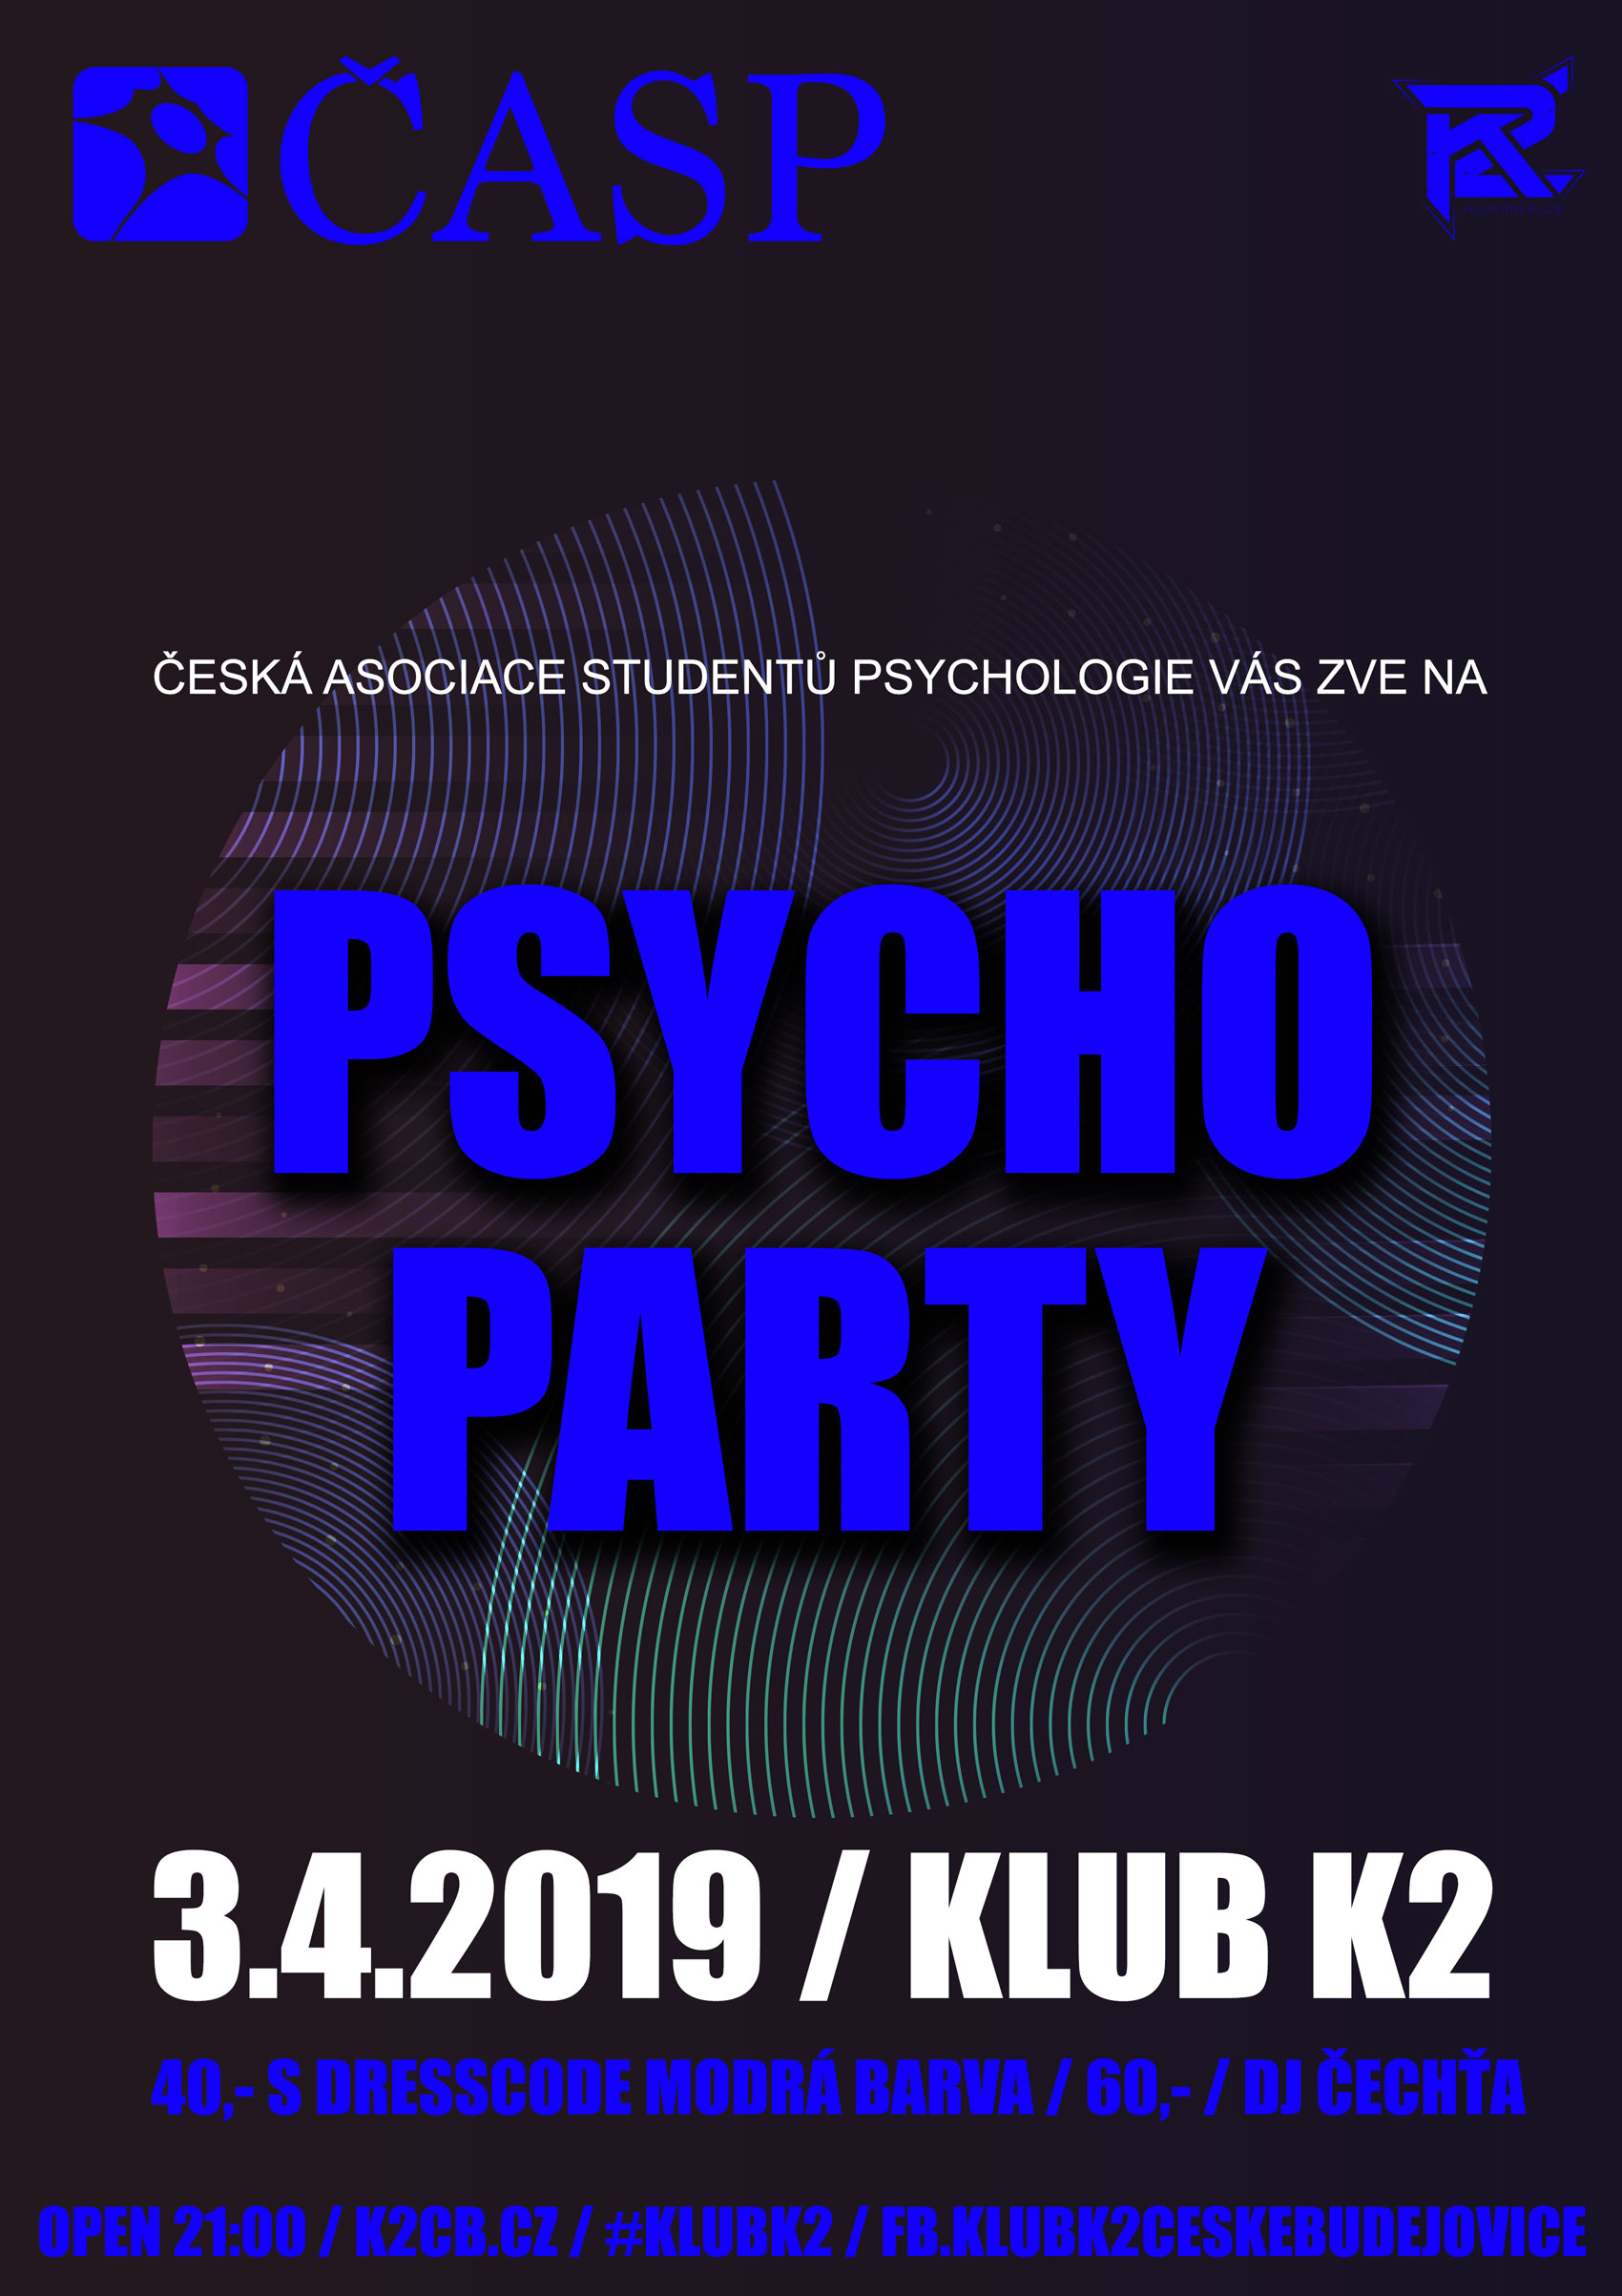 Psycho party